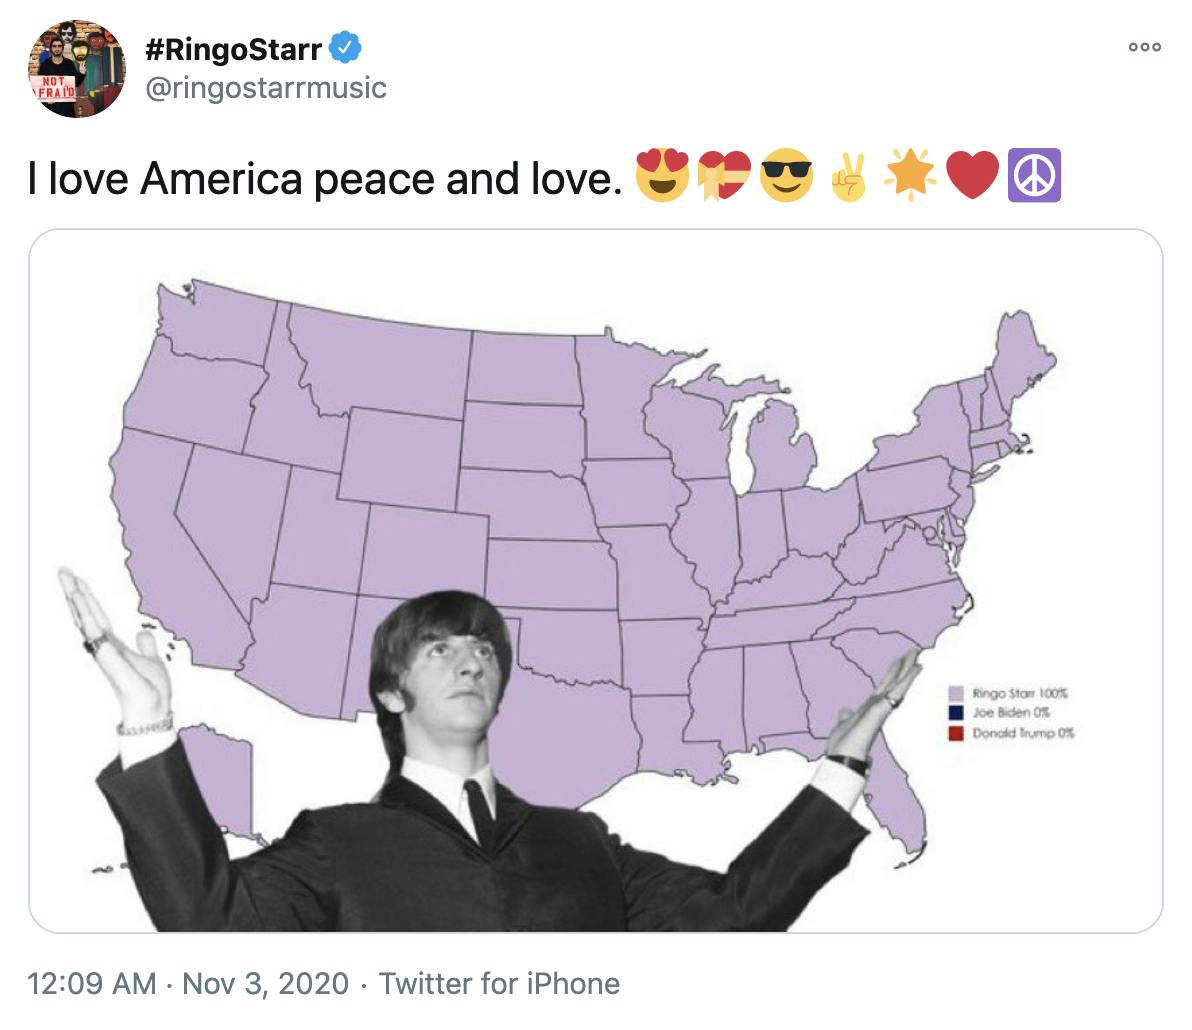 'I love America peace and love. Smiling face with heart-shaped eyesHeart with ribbonSmiling face with sunglassesVictory handGlowing starRed heartPeace symbol' image of the electoral college map all in purple with a black and white photo of Ringo Starr holding his arms out in front of it